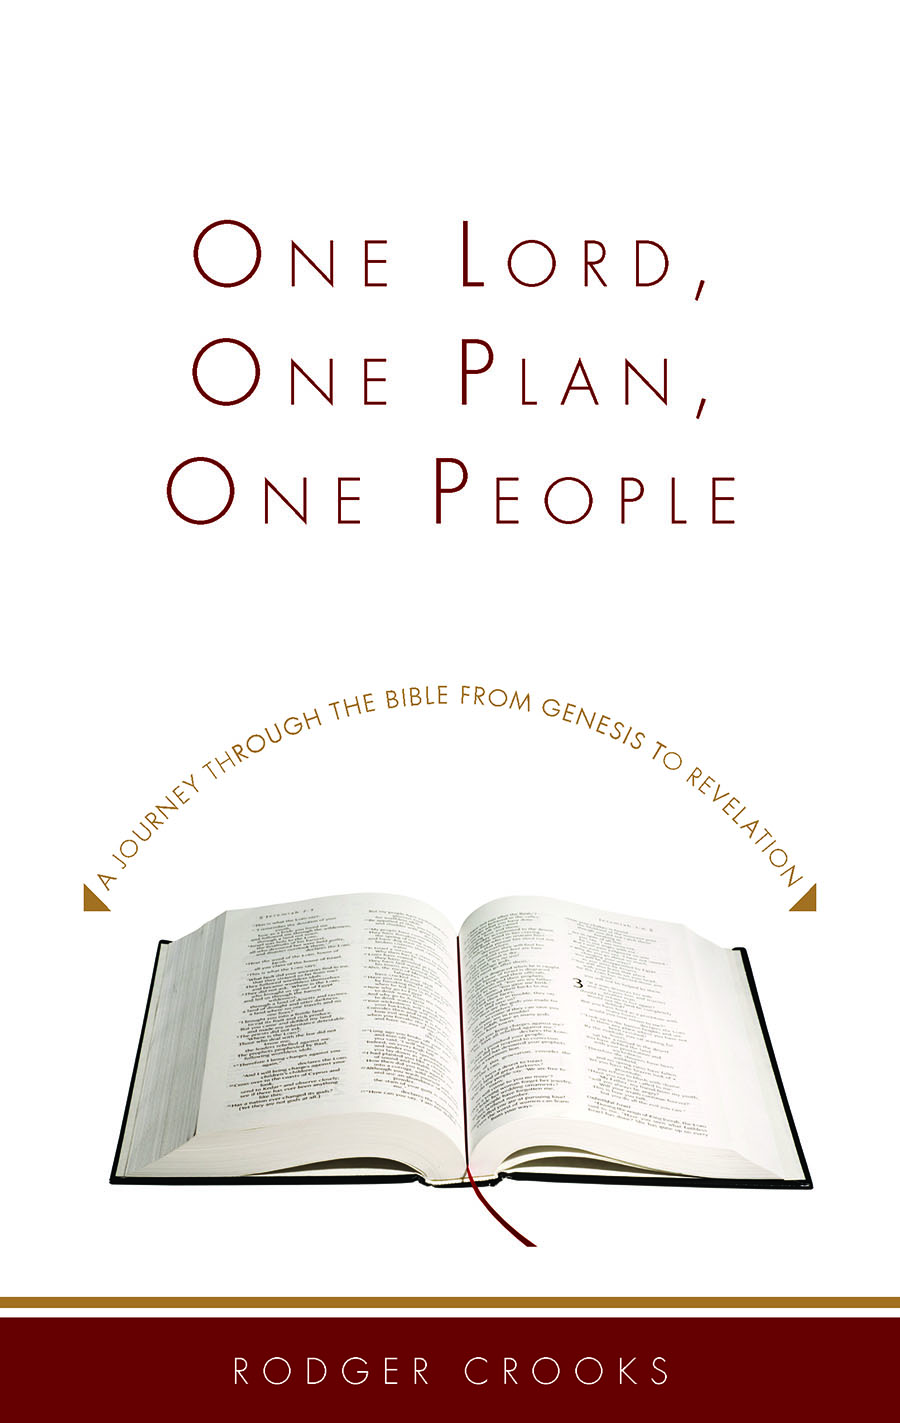 One Lord, One Plan, One People